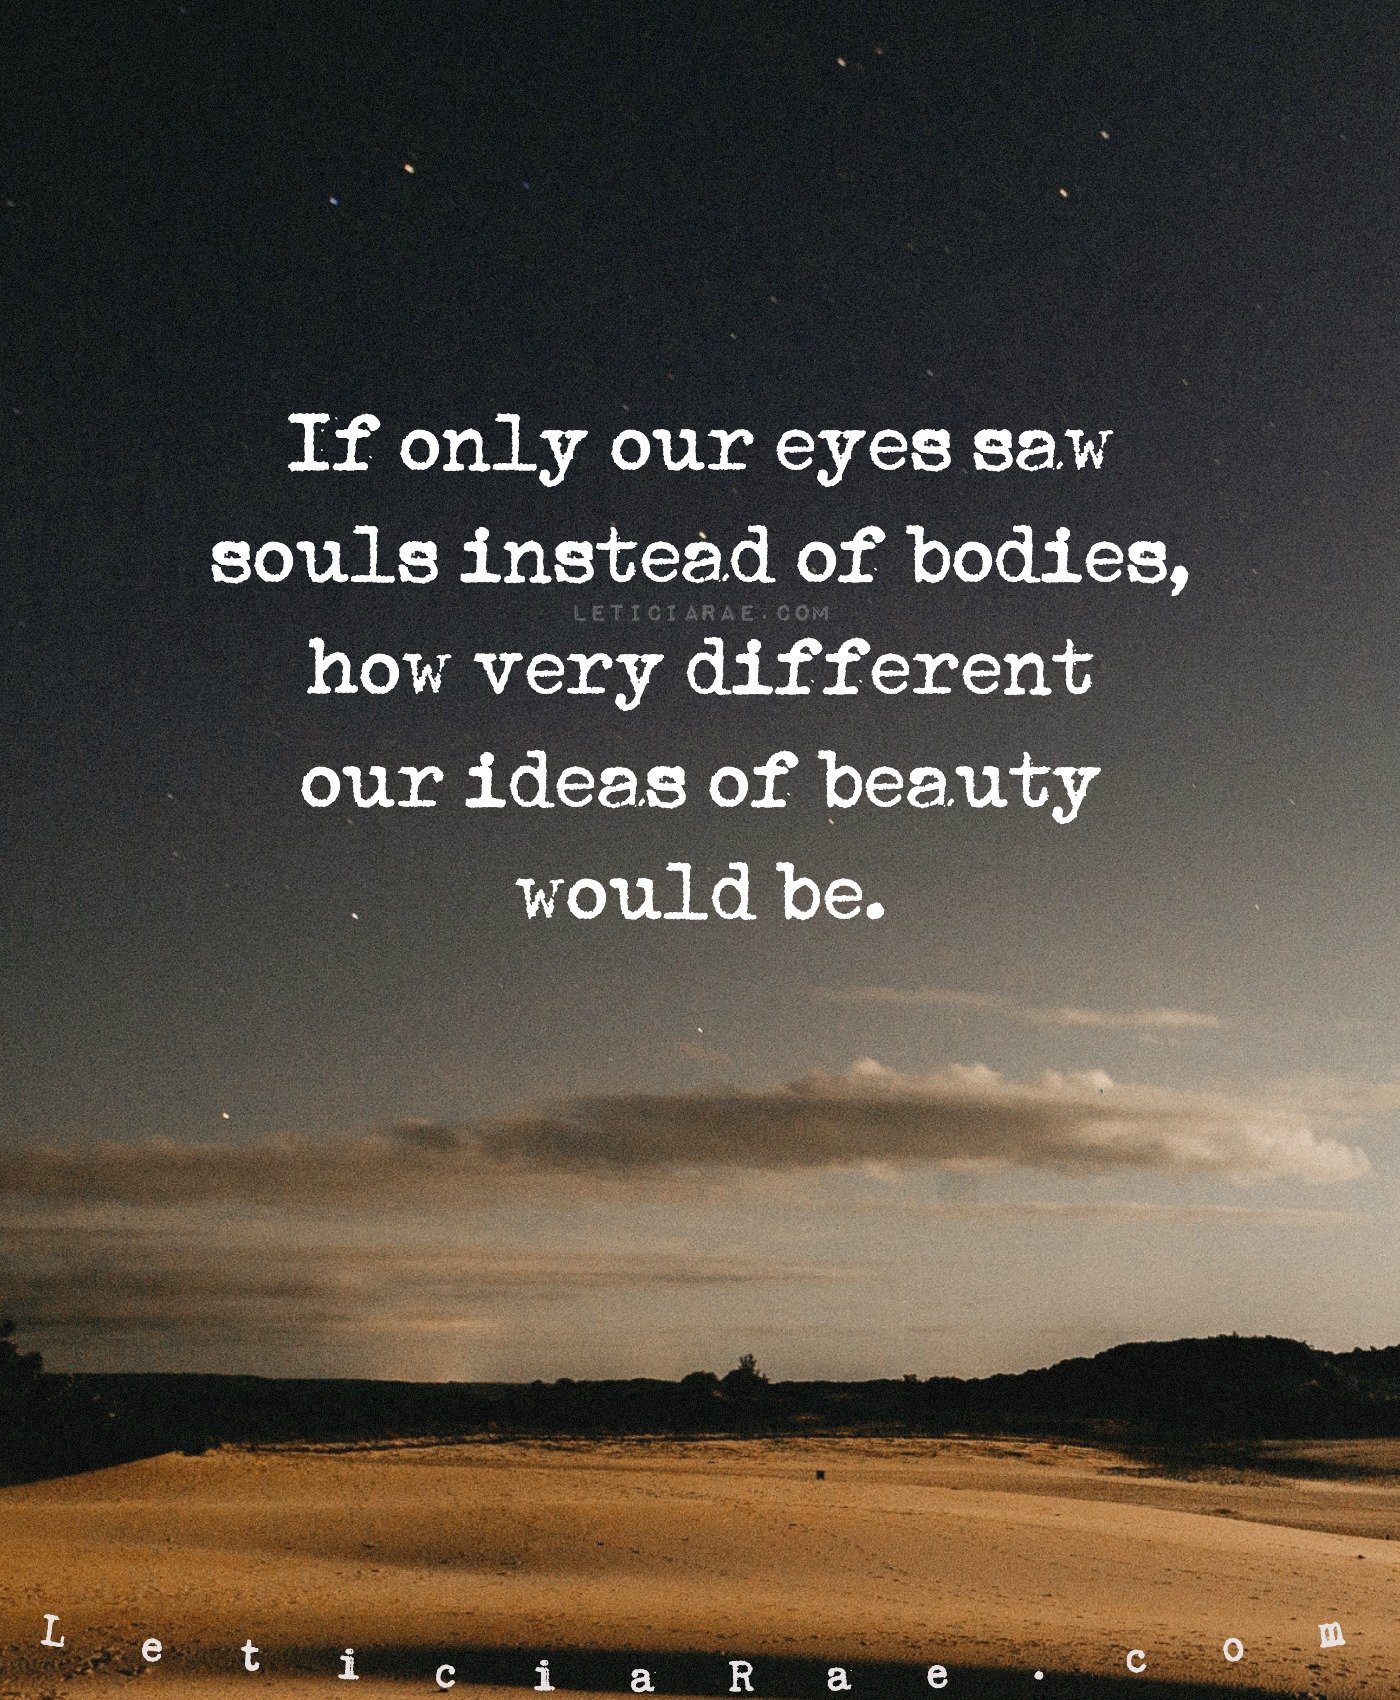 Quotes about Beauty — Finding The Silver Lining